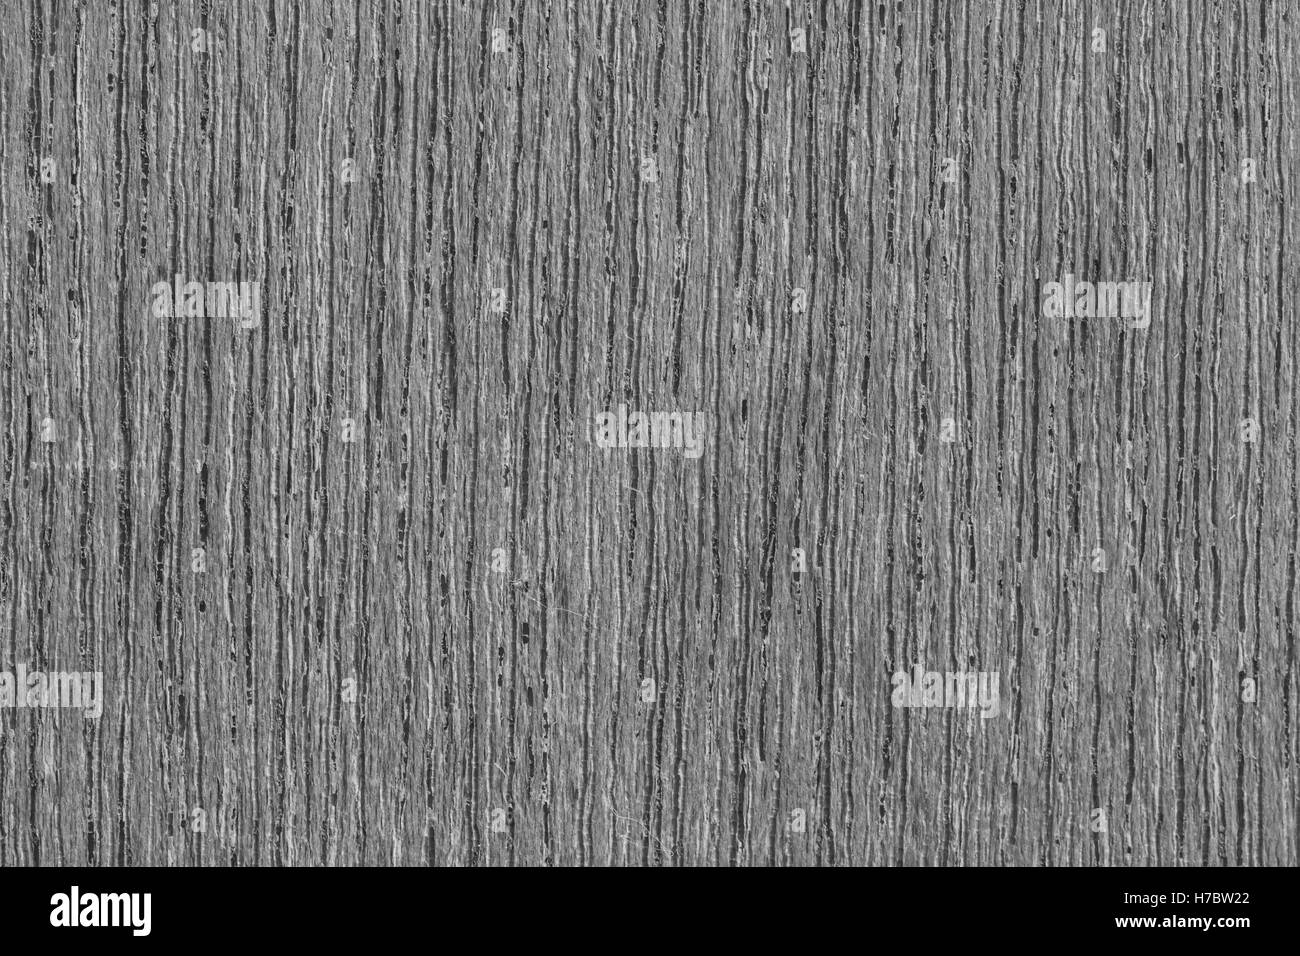 texture of bark wood use as natural background, black and white tone Stock Photo